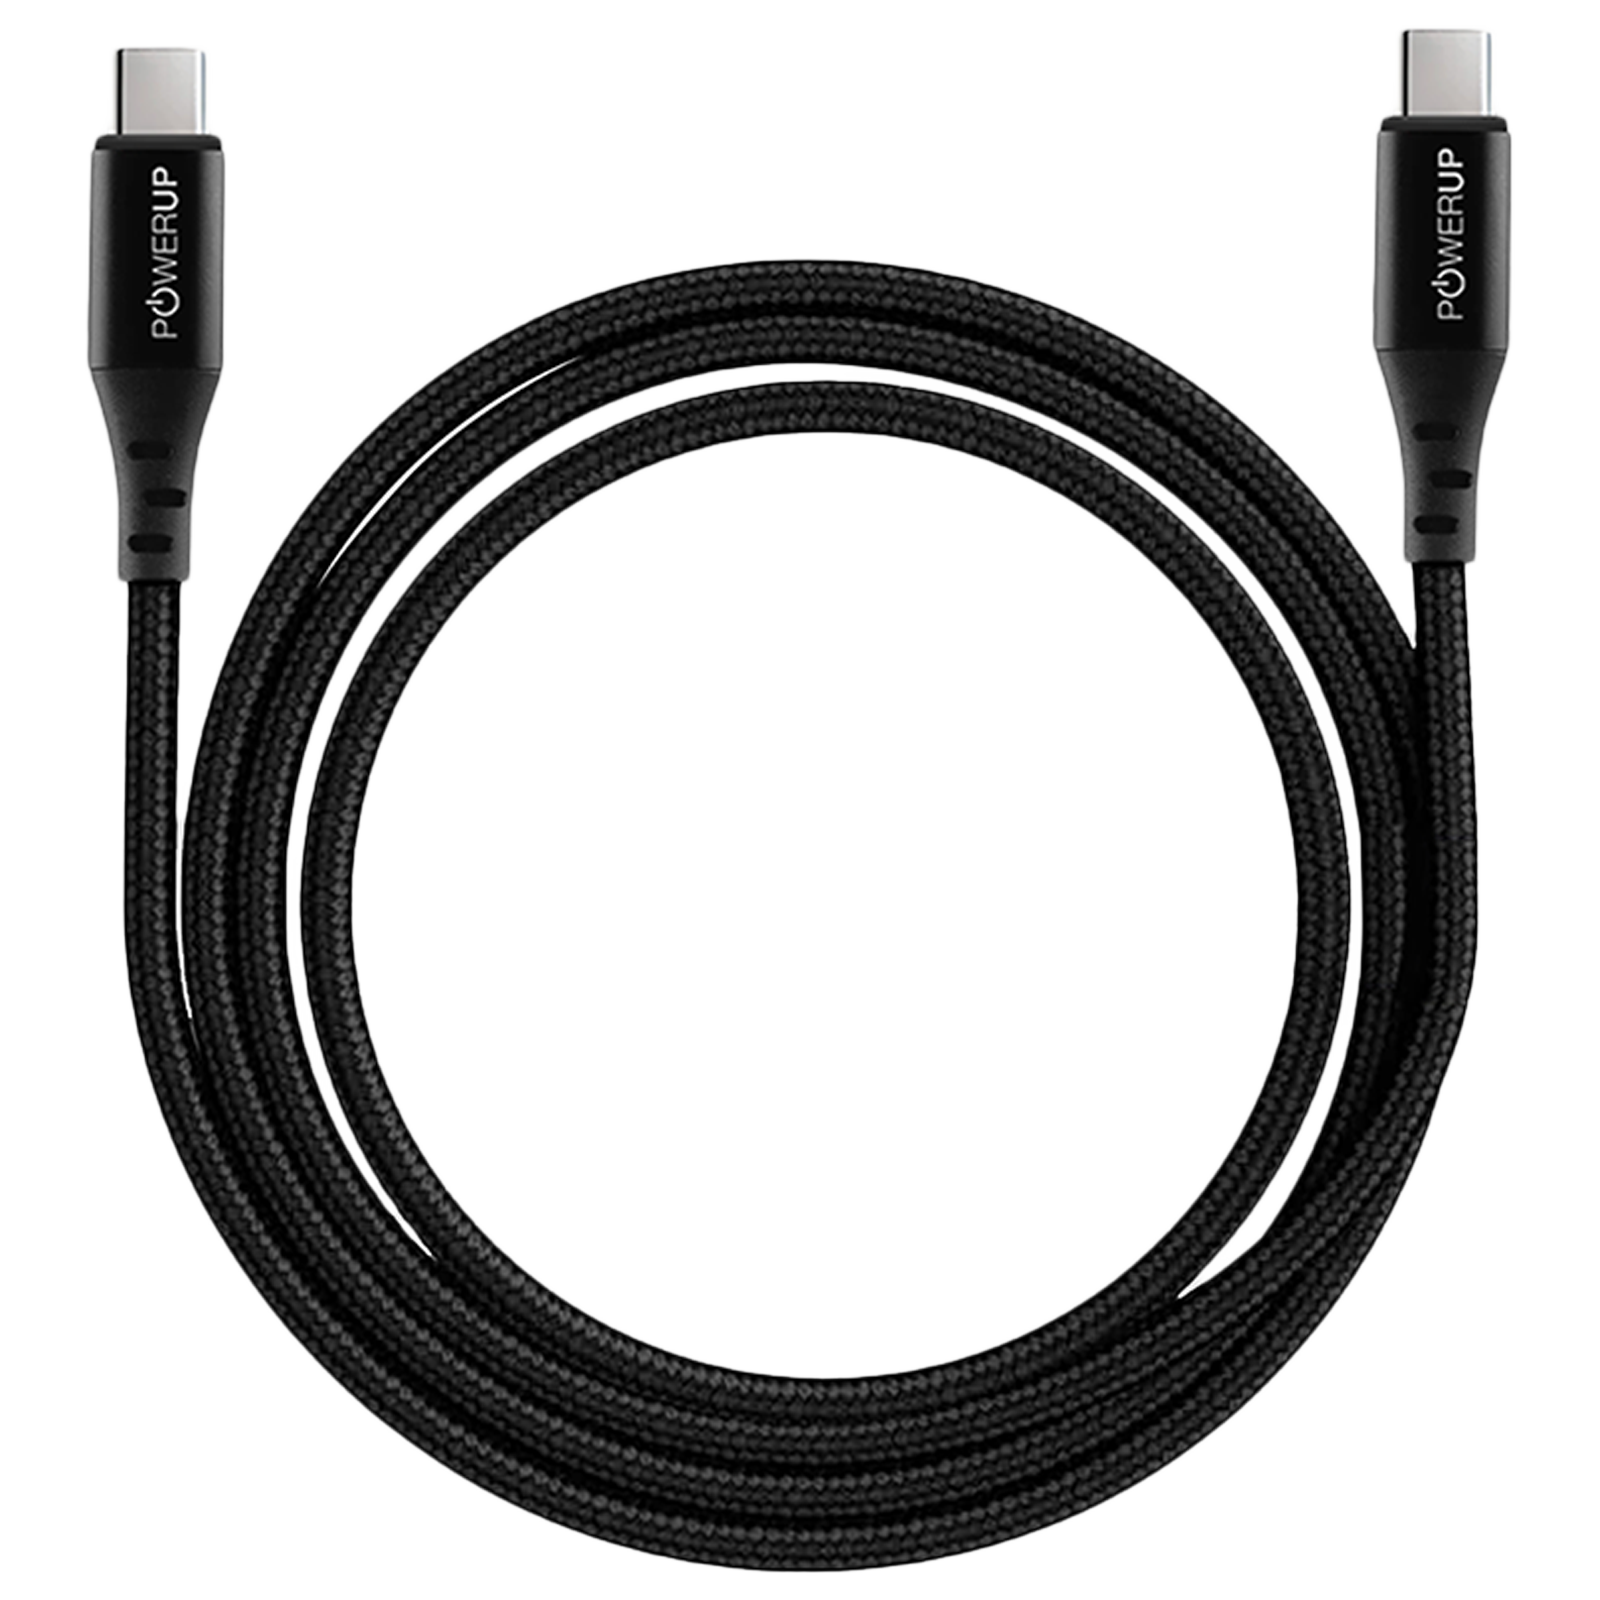 Powerup 2 Meter USB 2.0 (Type C) to USB 2.0 (Type C) Power/Charging USB Cable (PUP-CCNL100-20BK, Black)